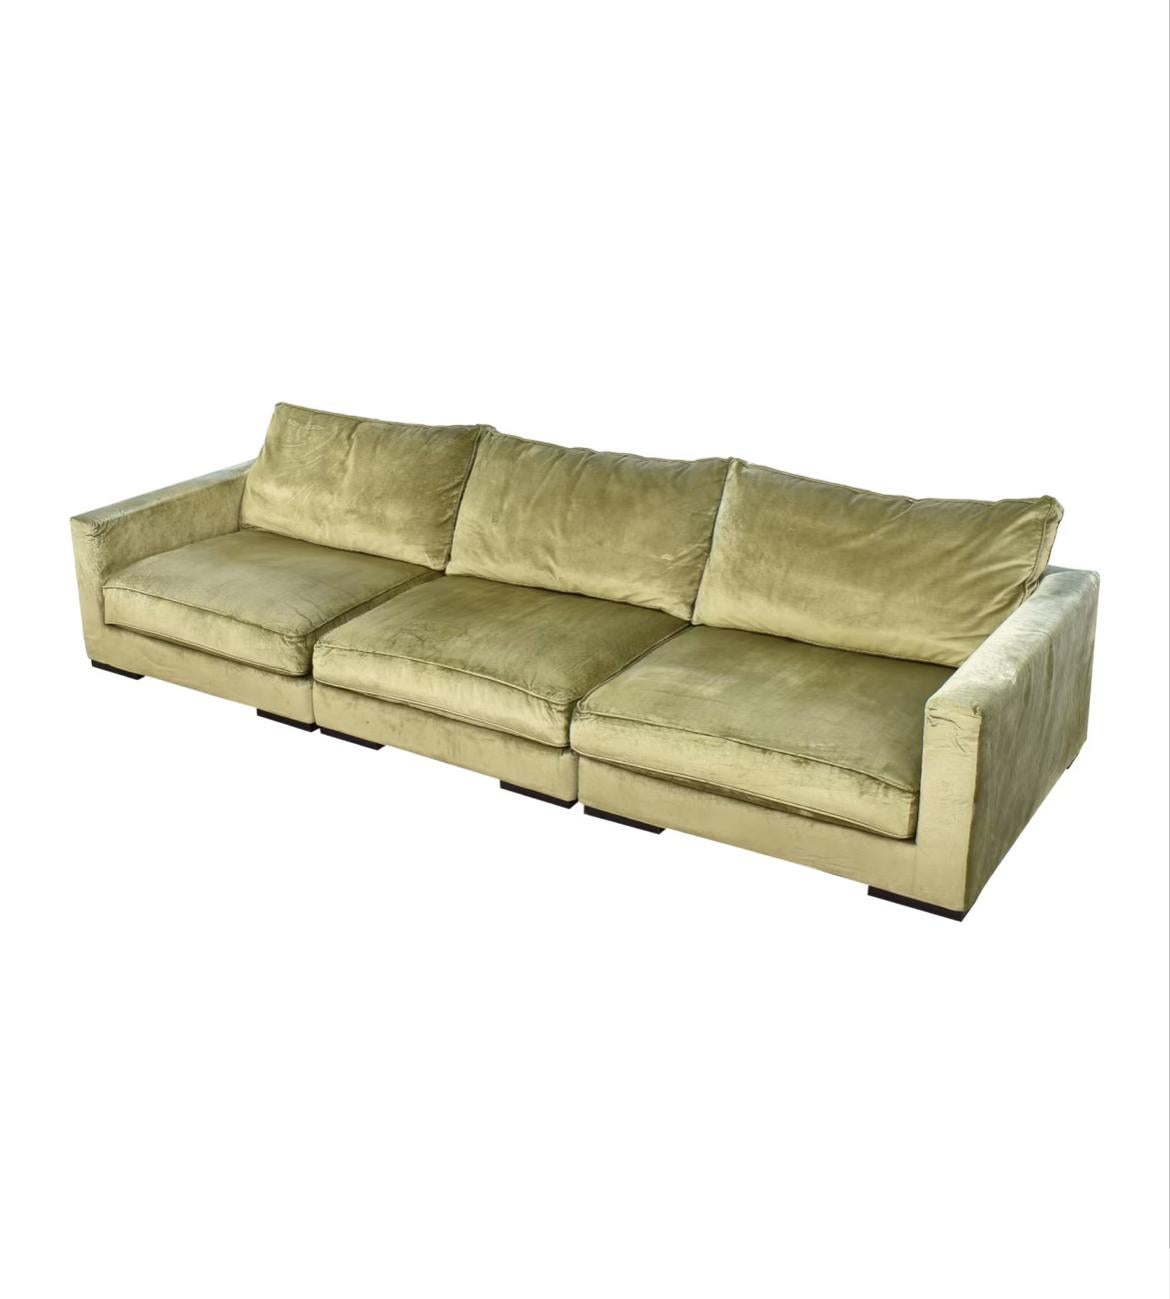 Stunning olive green couch from Roche Bobois in a luxurious chenille or velvet fabric.

This “Long Island” model currently retails for over $30,000. 

The fabric reflects light creating a luminous and rich appearance.

The couch is large and deep.